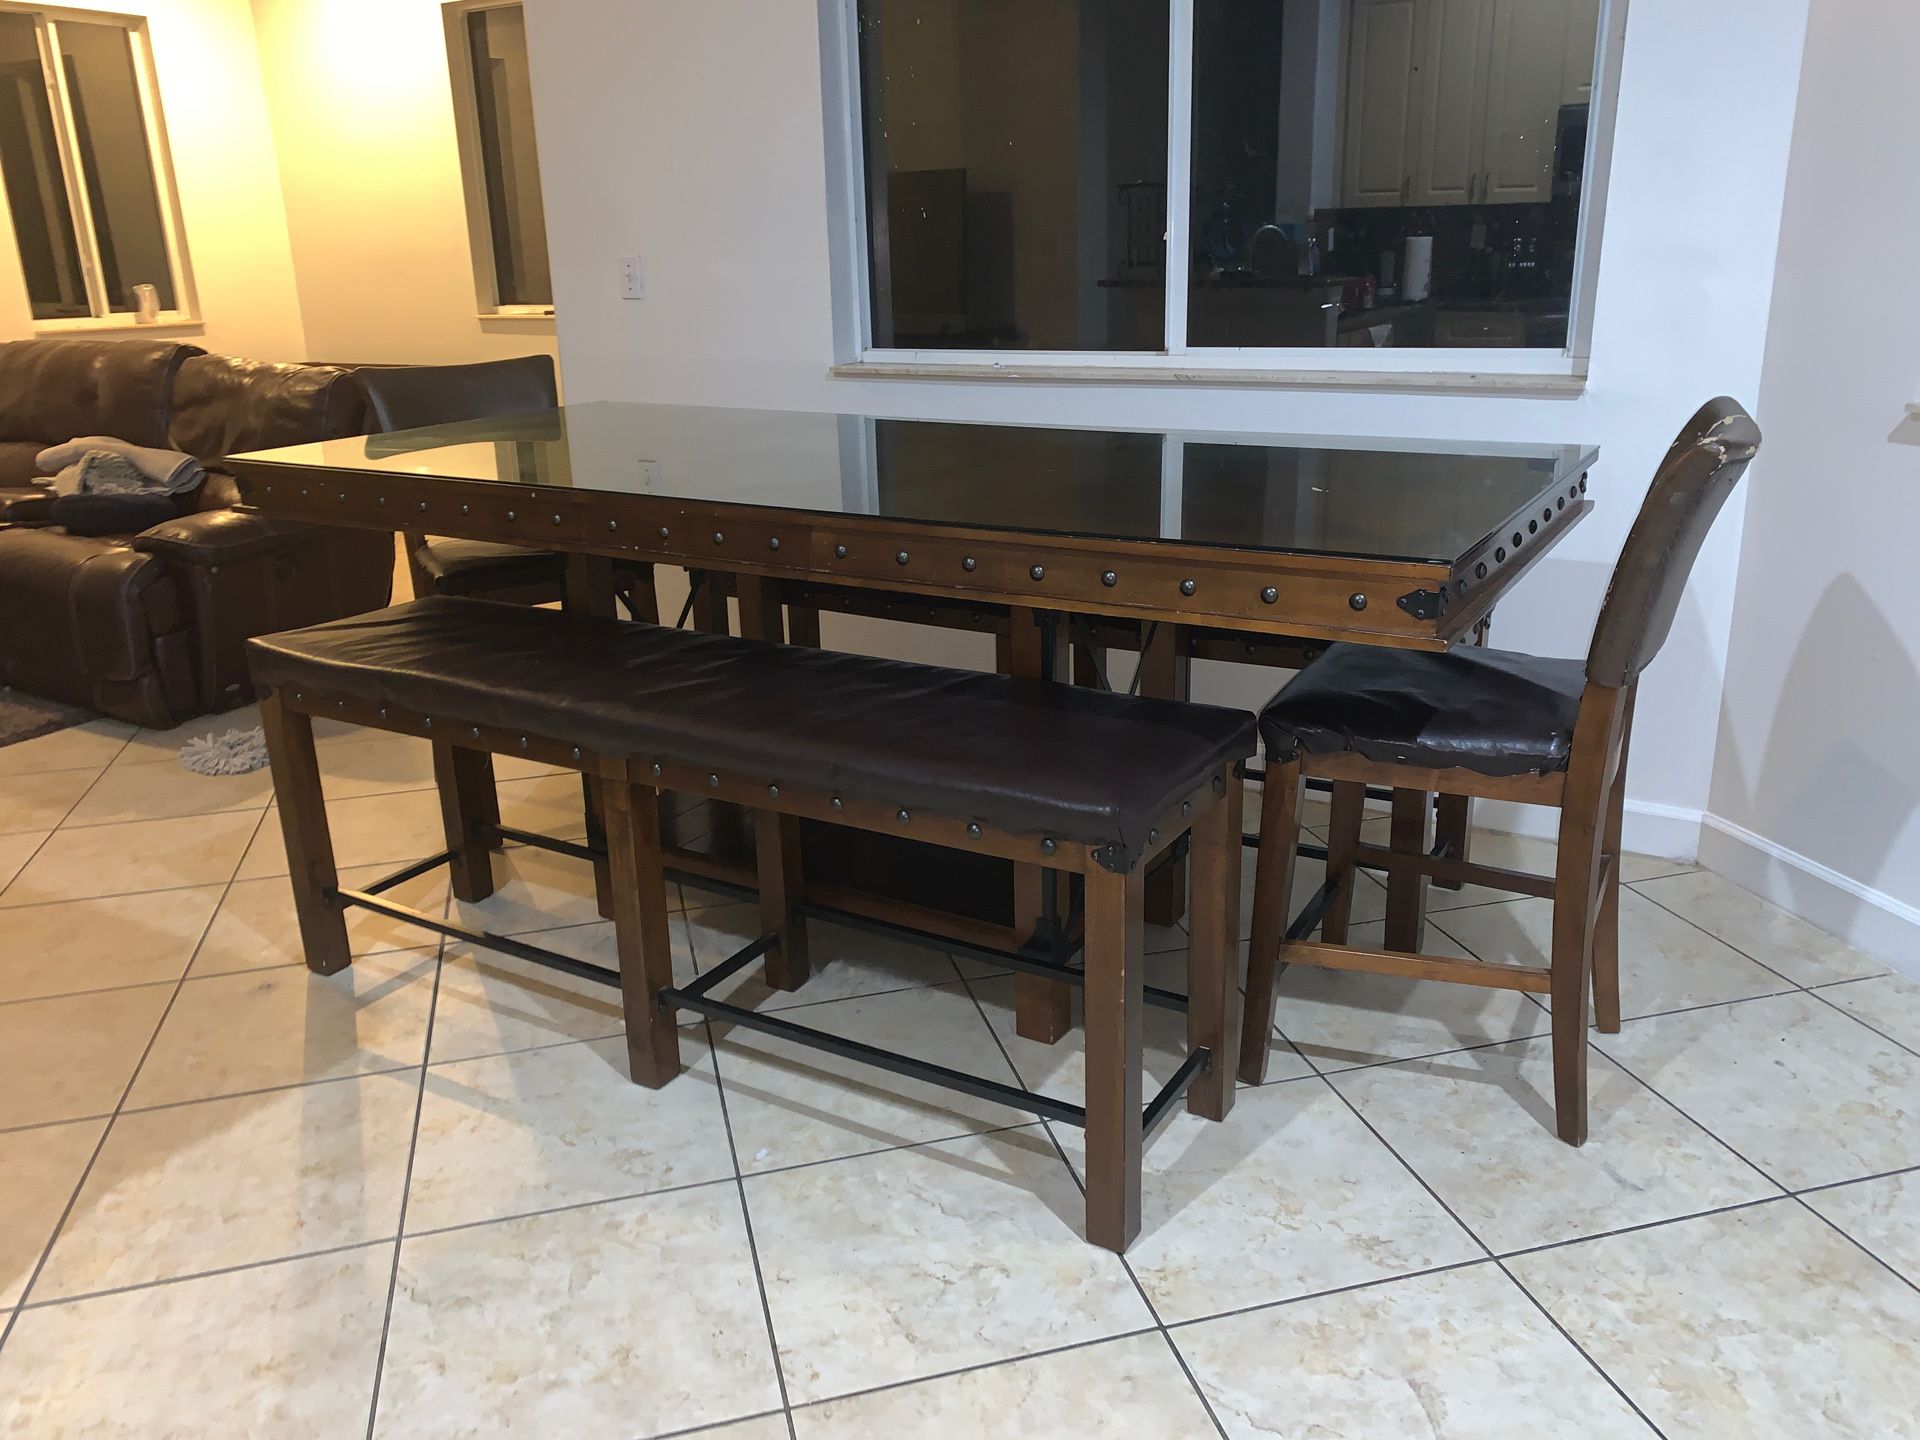 Very tall dining wood table with glass top 2 benches and 2 stools